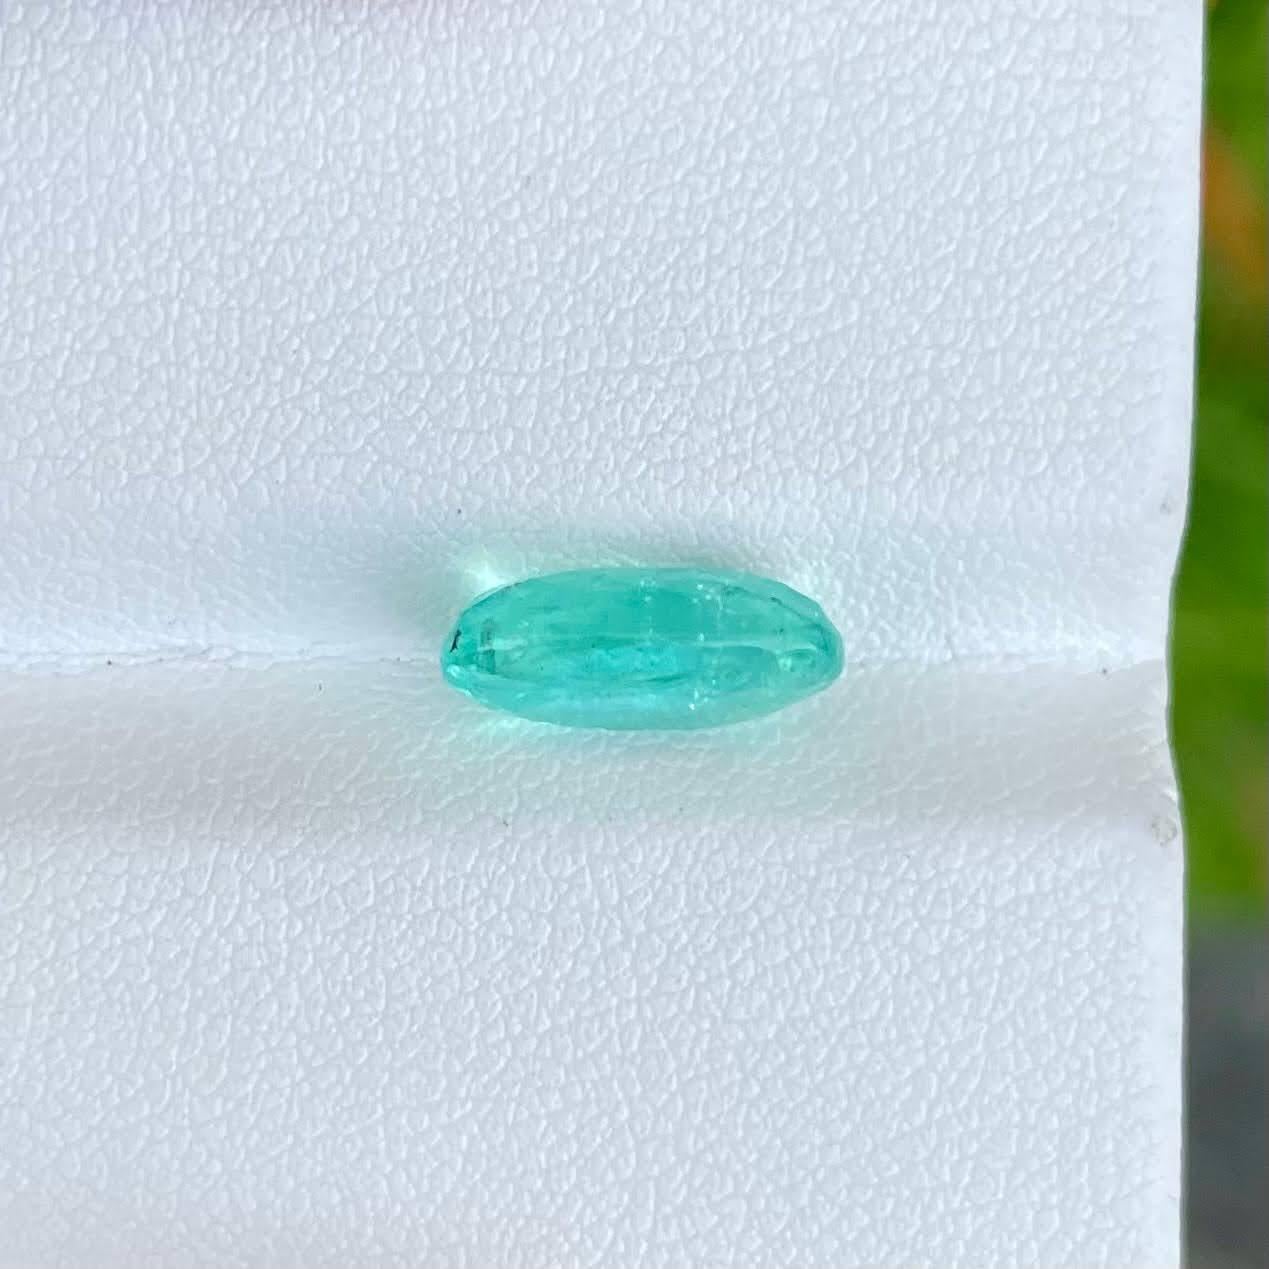 2.96 Carats Paraiba Tourmaline Oval Cut Natural Mozambique Stone AIGS Certified For Sale 1